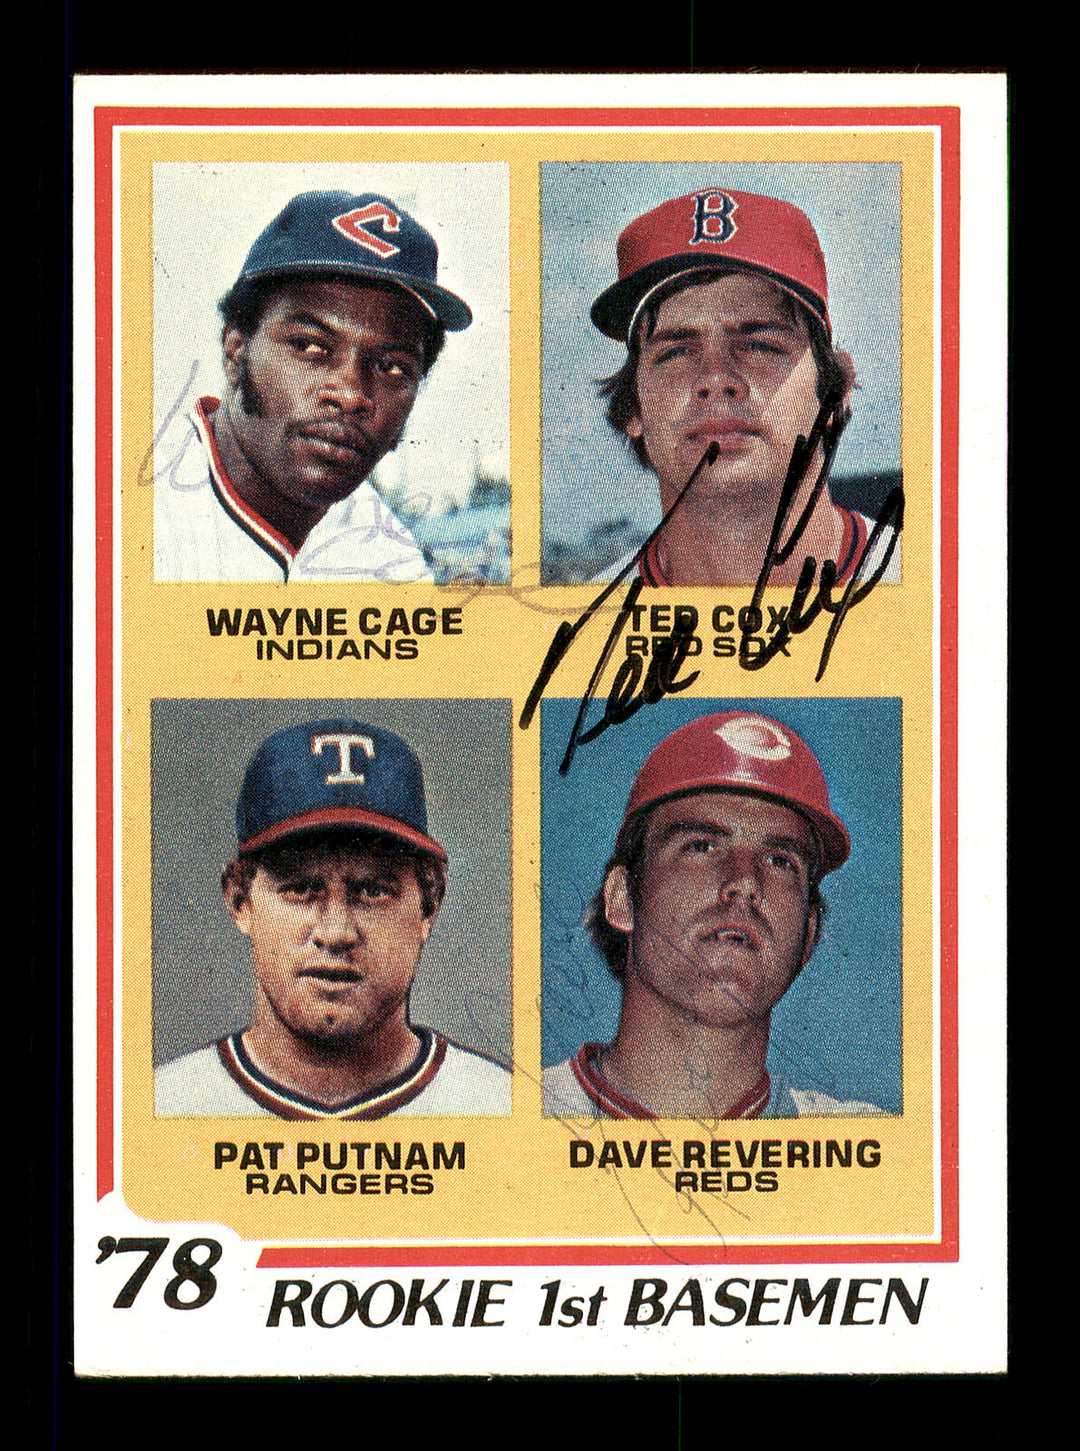 Wayne Cage, Ted Cox & Revering Autographed 1978 Topps Rookie Card 706 167814 Image 1